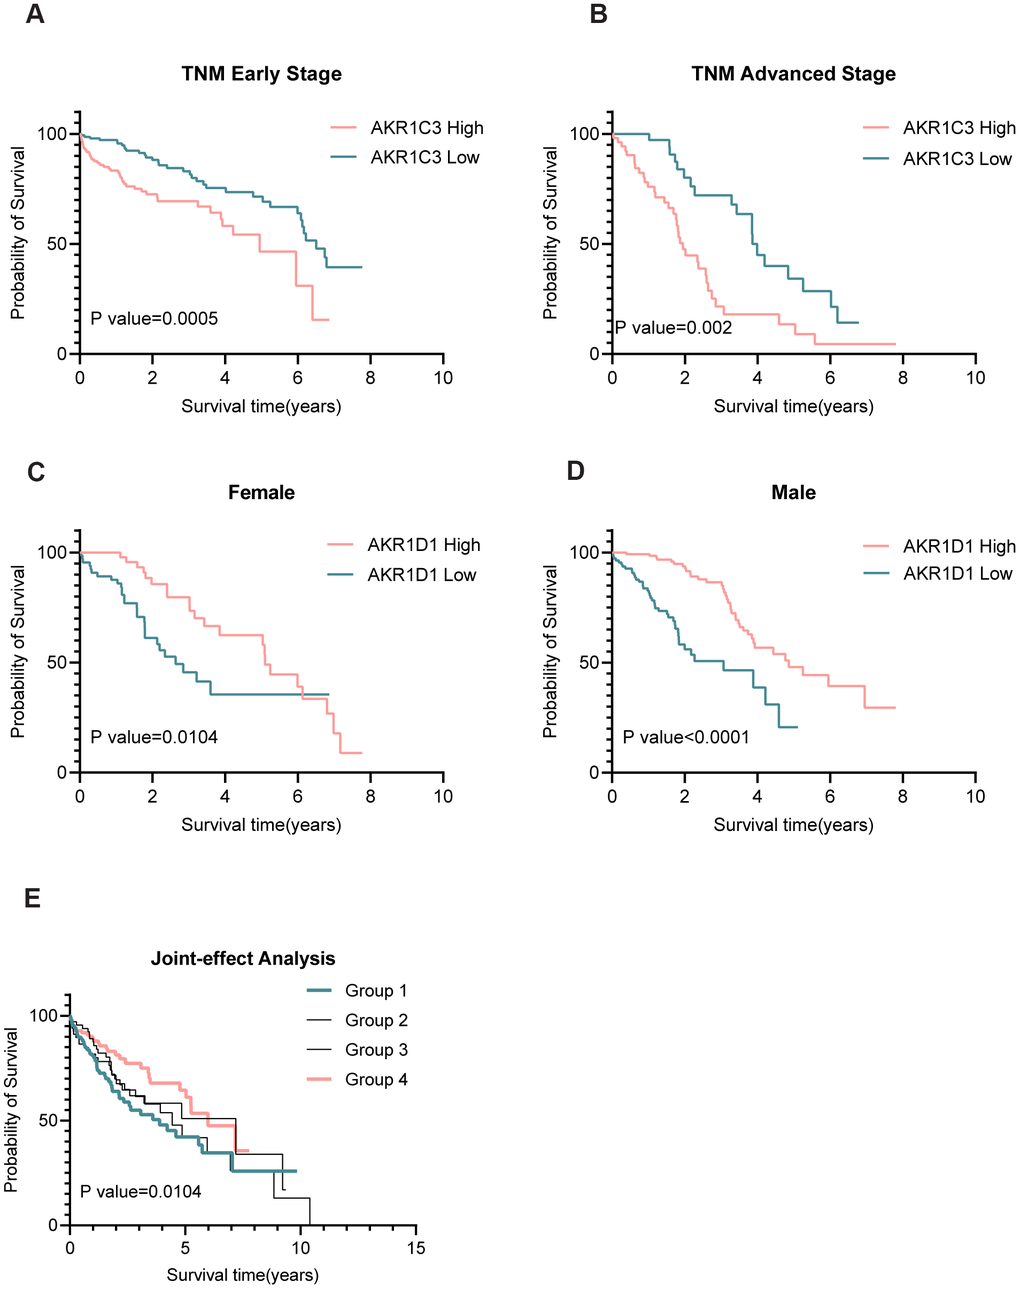 Subgroup and joint-effect analysis of AKR1C3 and AKR1D1. (A, B) High expression of AKR1C3 suggested poor prognosis in the early and advanced TNM stage. (C, D) Low expression of AKR1D1 was related to poor prognosis in male and female. (E) Joint-effect analysis of AKR1C3 and AKR1D1.